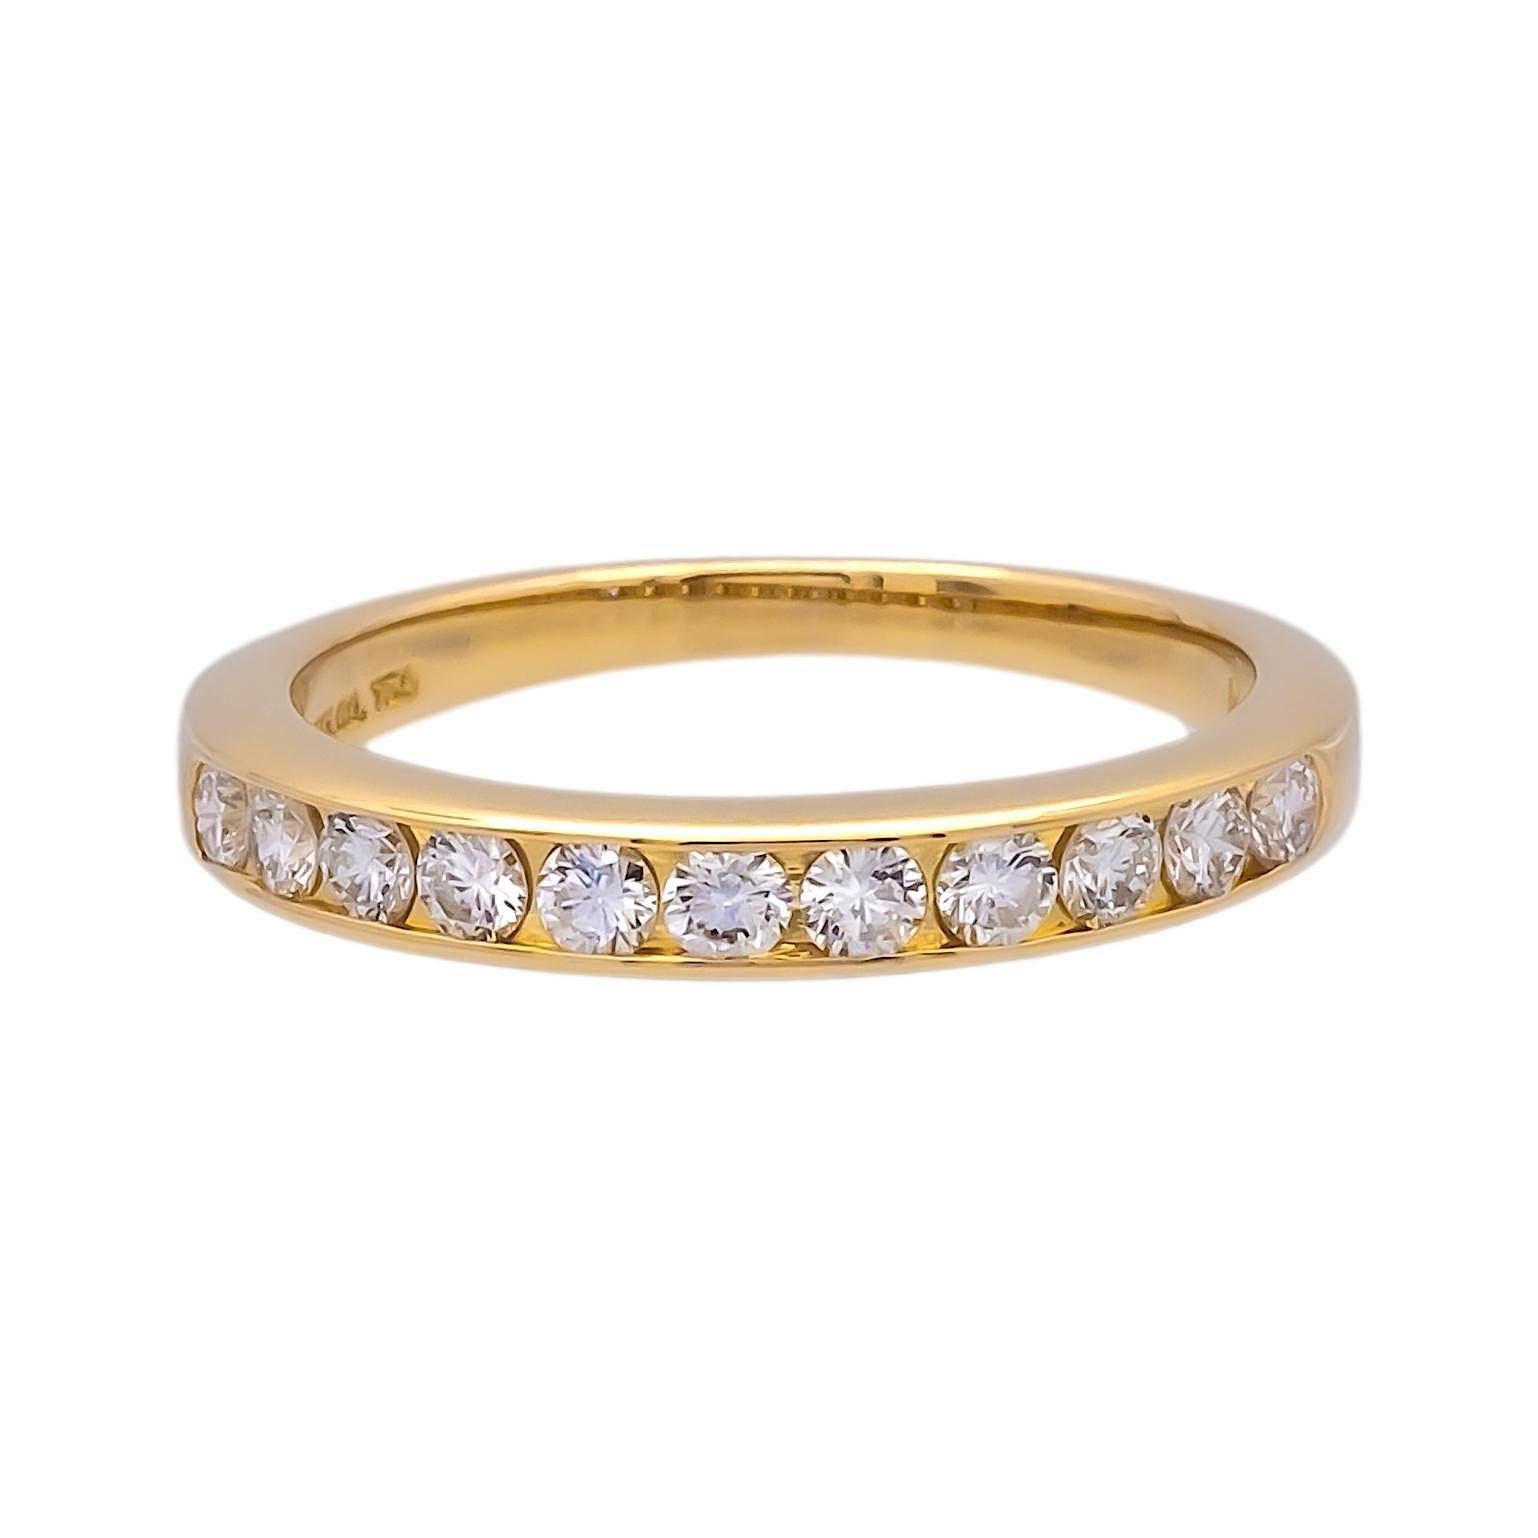 Tiffany & Co Channel set Wedding/Anniversary band finely crafted in 18K yellow gold with 11 round brilliant cut diamonds weighing 0.33 cts. total weight ranging in near colorless F-G color and VVS clarity set in a halfway channel measuring 3mm wide.